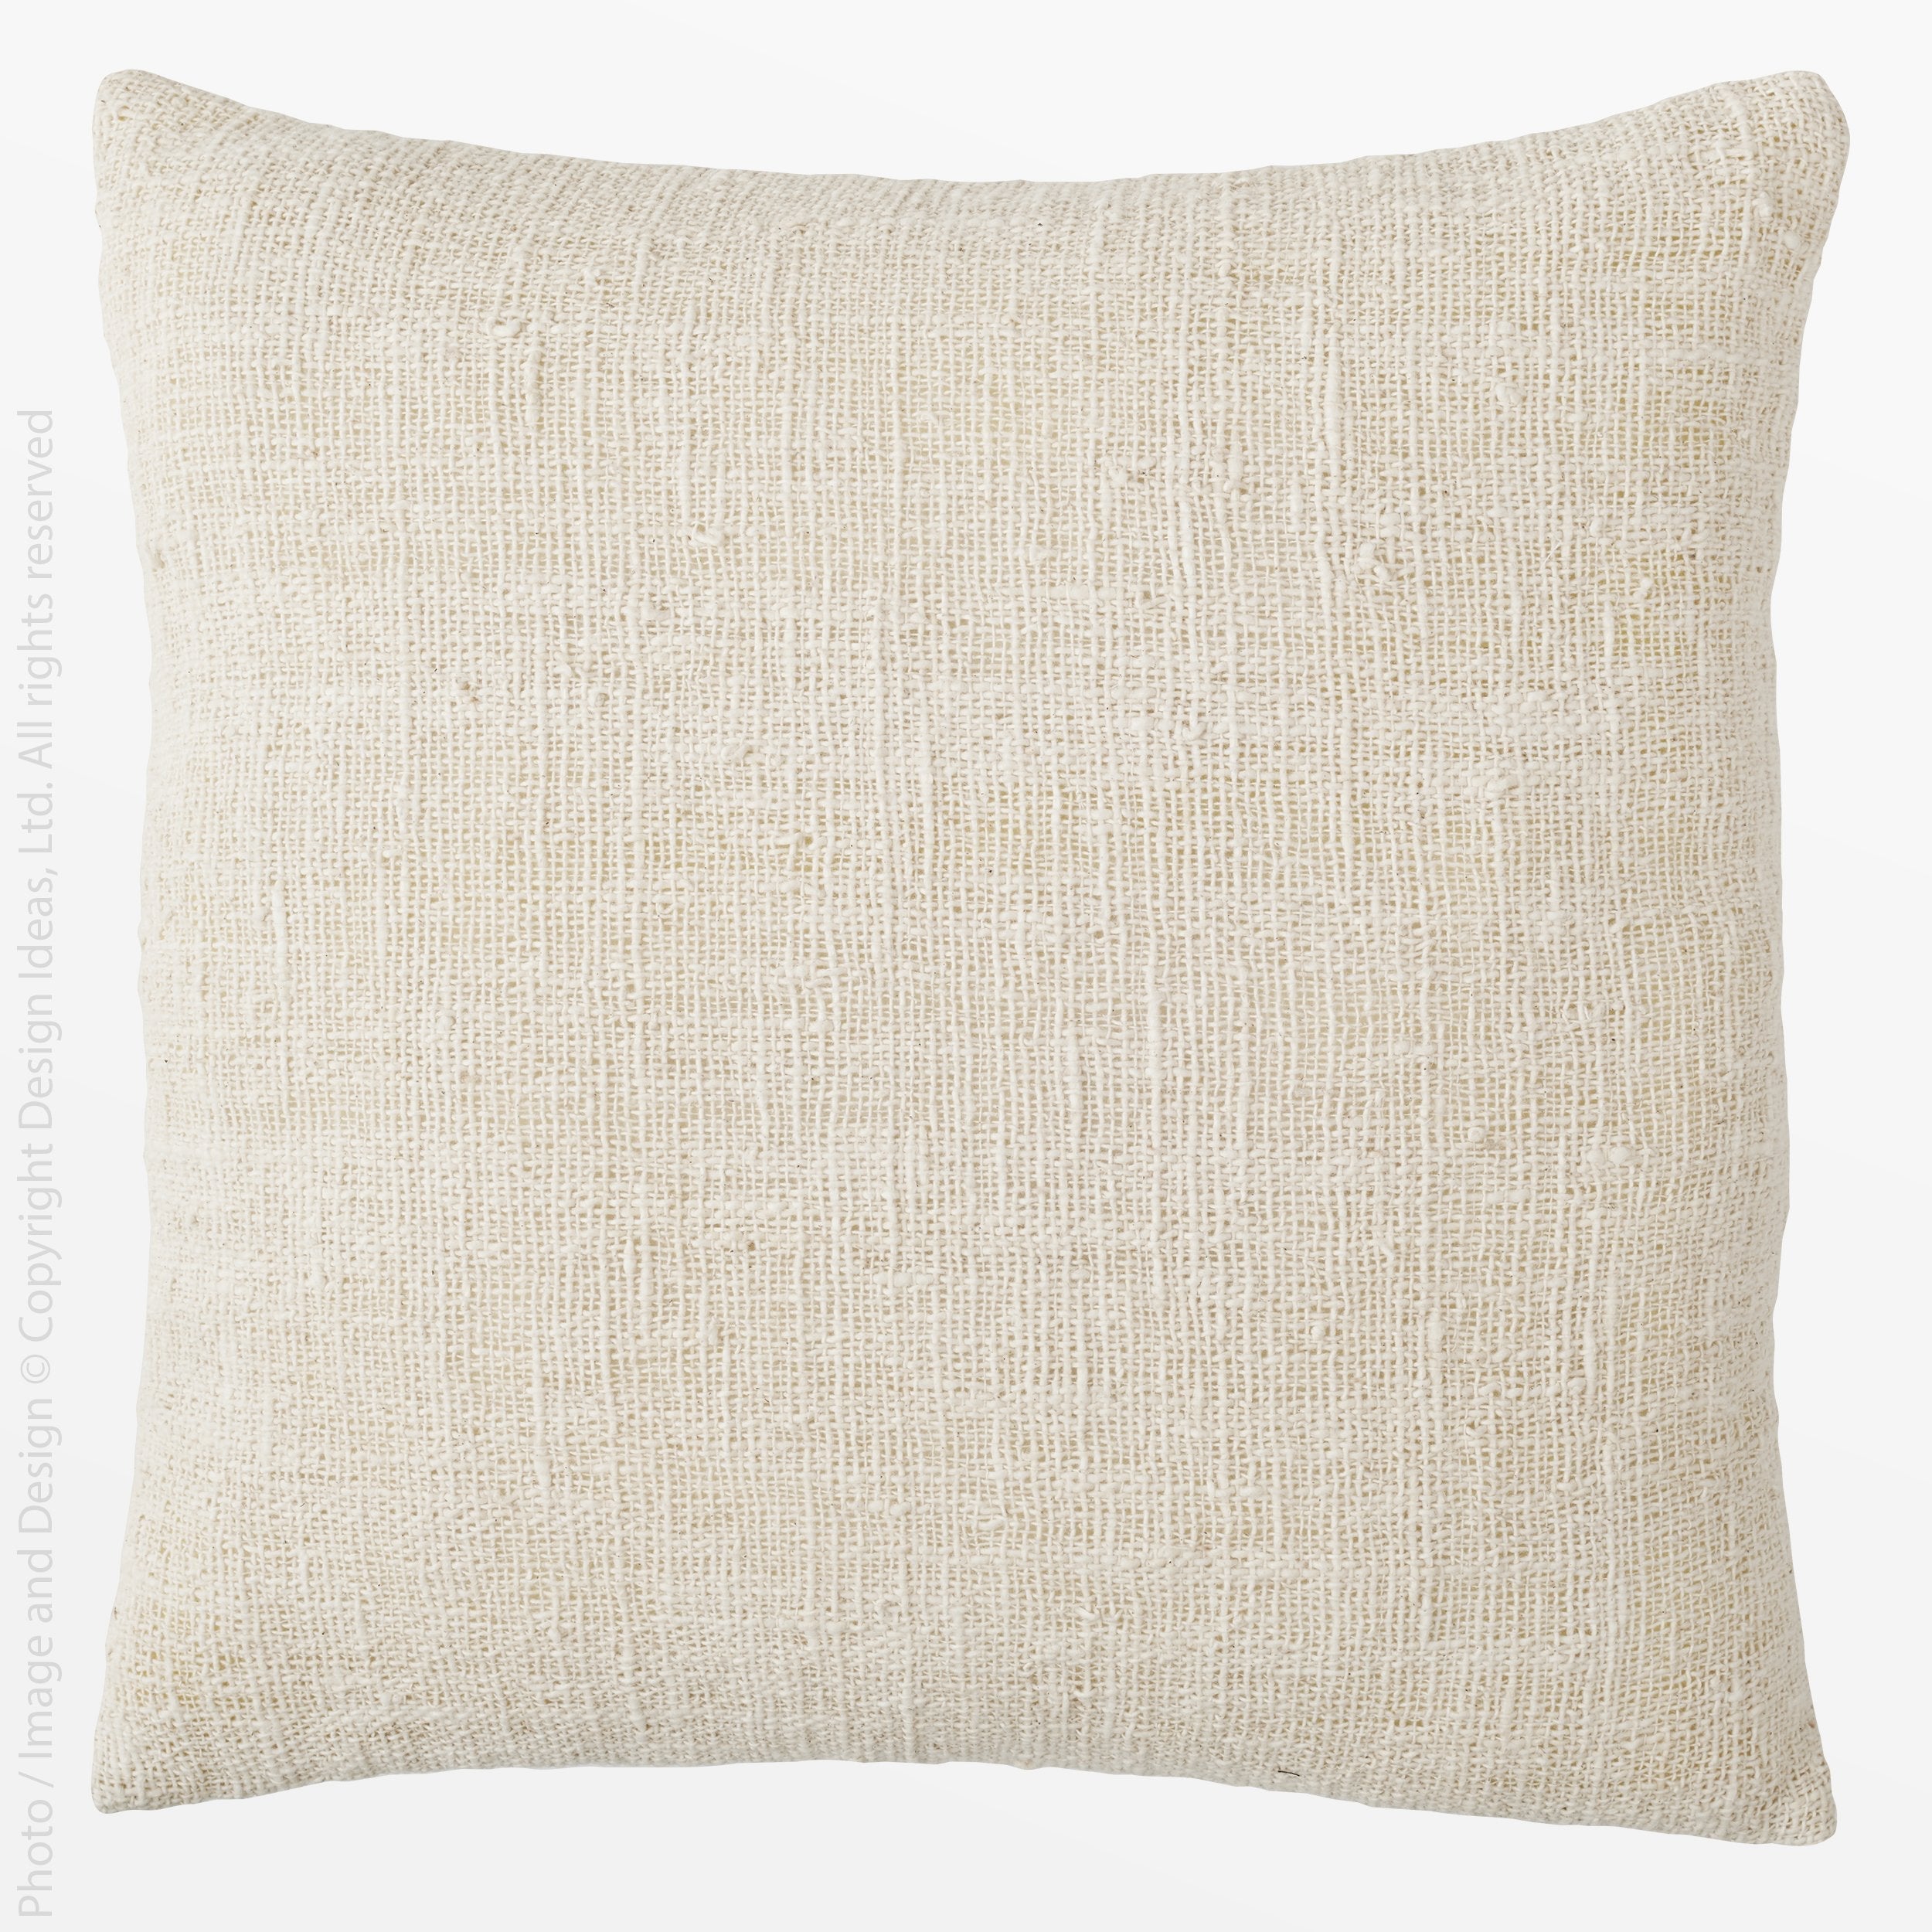 Capri Loosely Woven Cotton Cushion Cover (Large) - Black Color | Image 1 | From the Capri Collection | Elegantly Loosely Woven with natural cotton for long lasting use | Available in natural color | texxture home